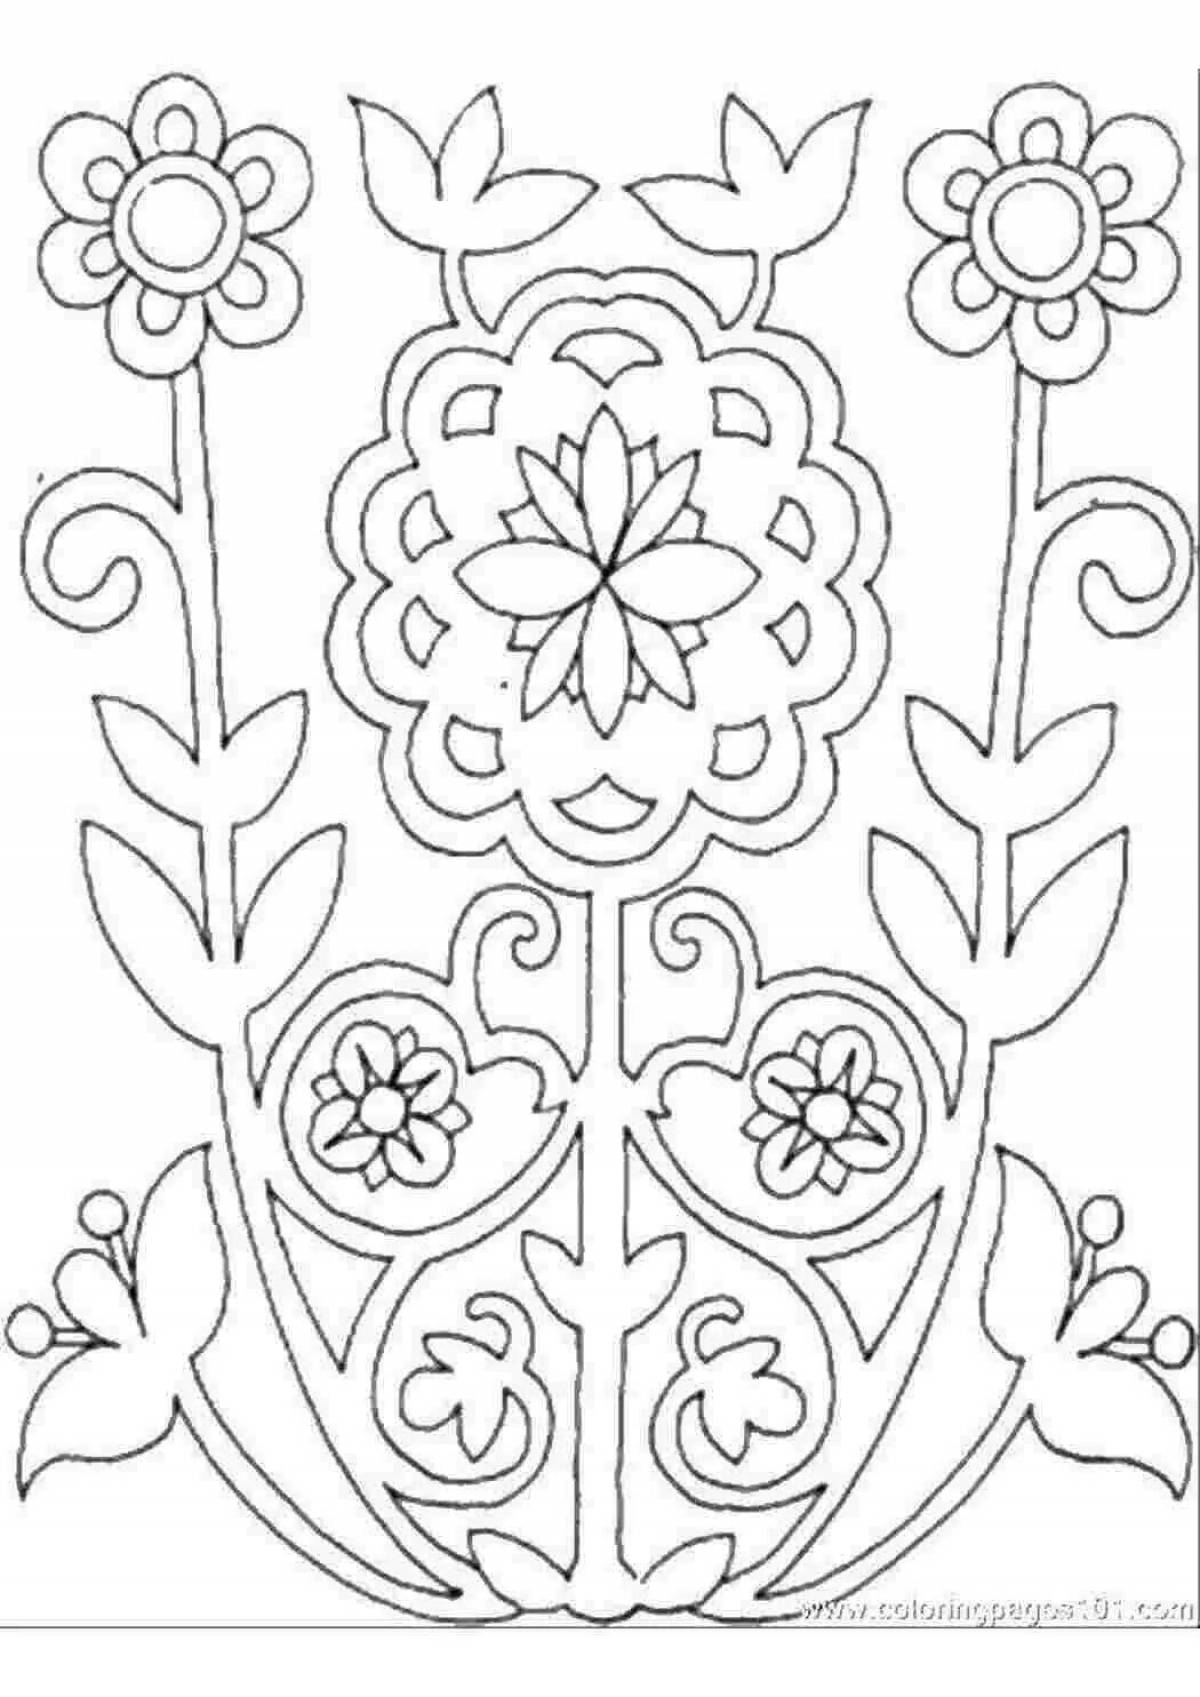 Detailed coloring page with Russian ornaments